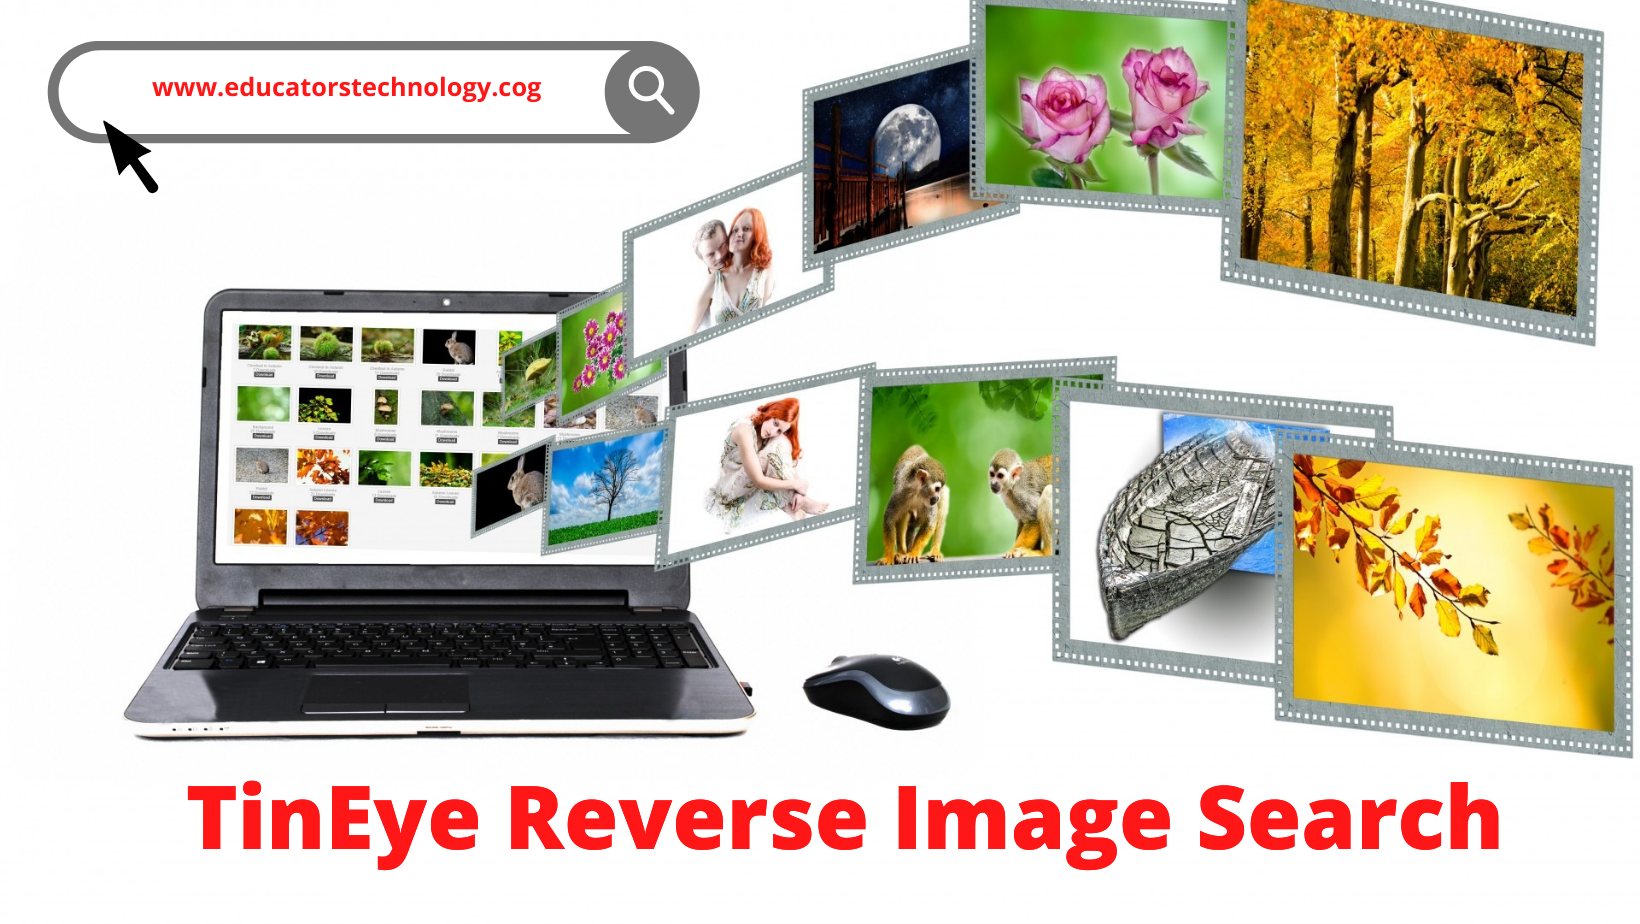 TinEye Reverse Image Search Full Review